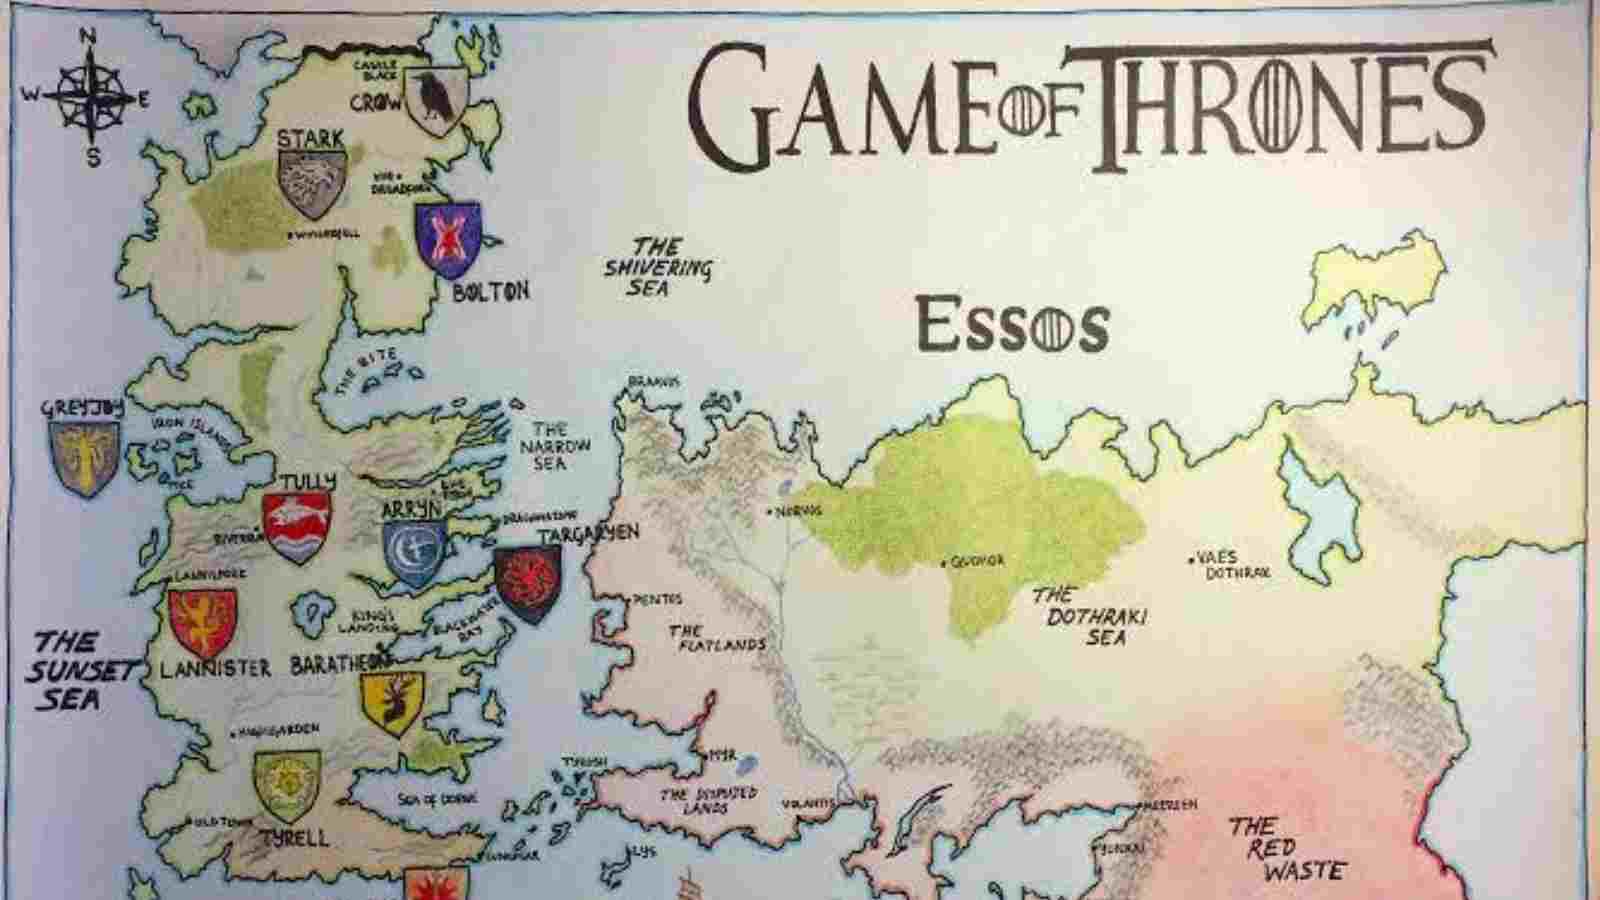 What are the free cities of Essos and how are they important to Westeros?